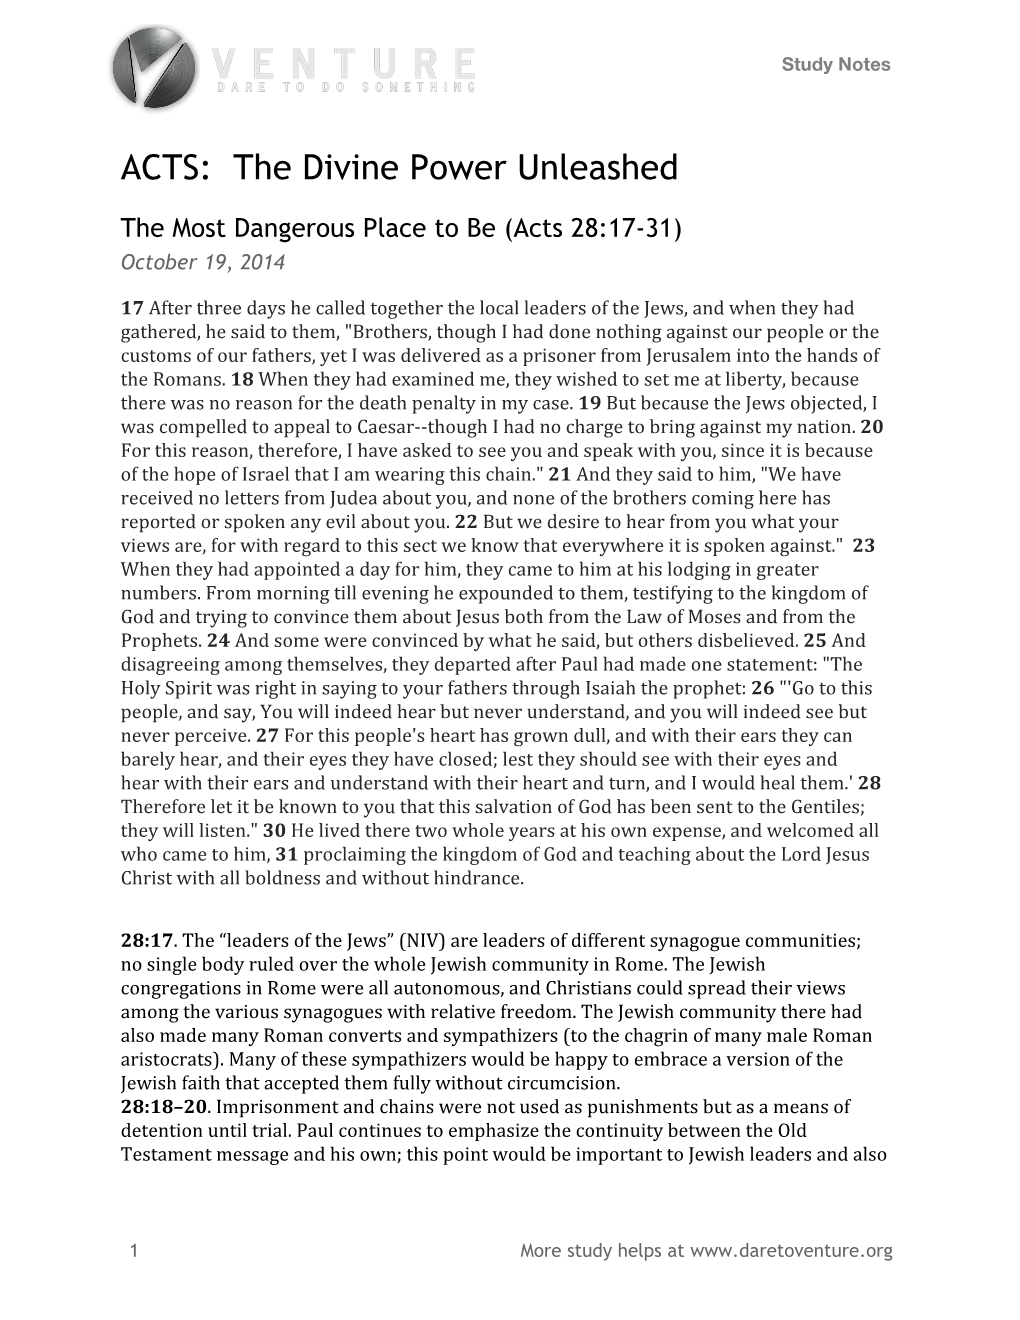 ACTS: the Divine Power Unleashed